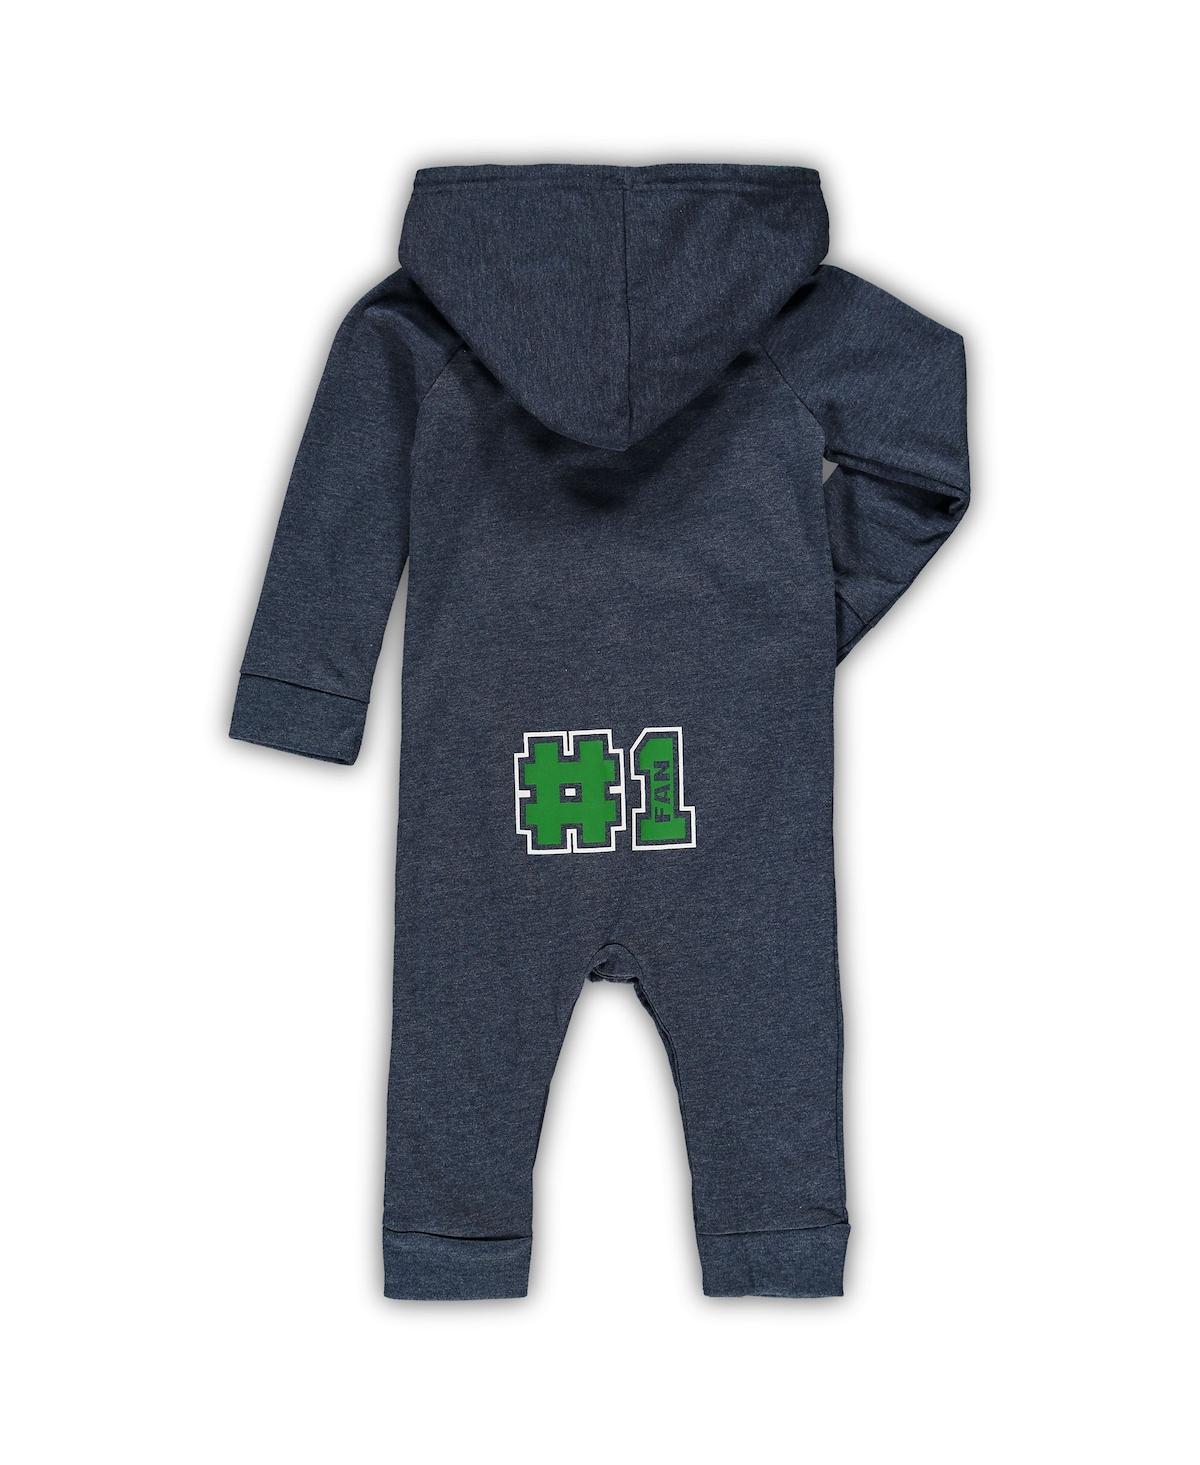 Shop Colosseum Newborn And Infant Boys And Girls  Heathered Navy Notre Dame Fighting Irish Henry Pocketed